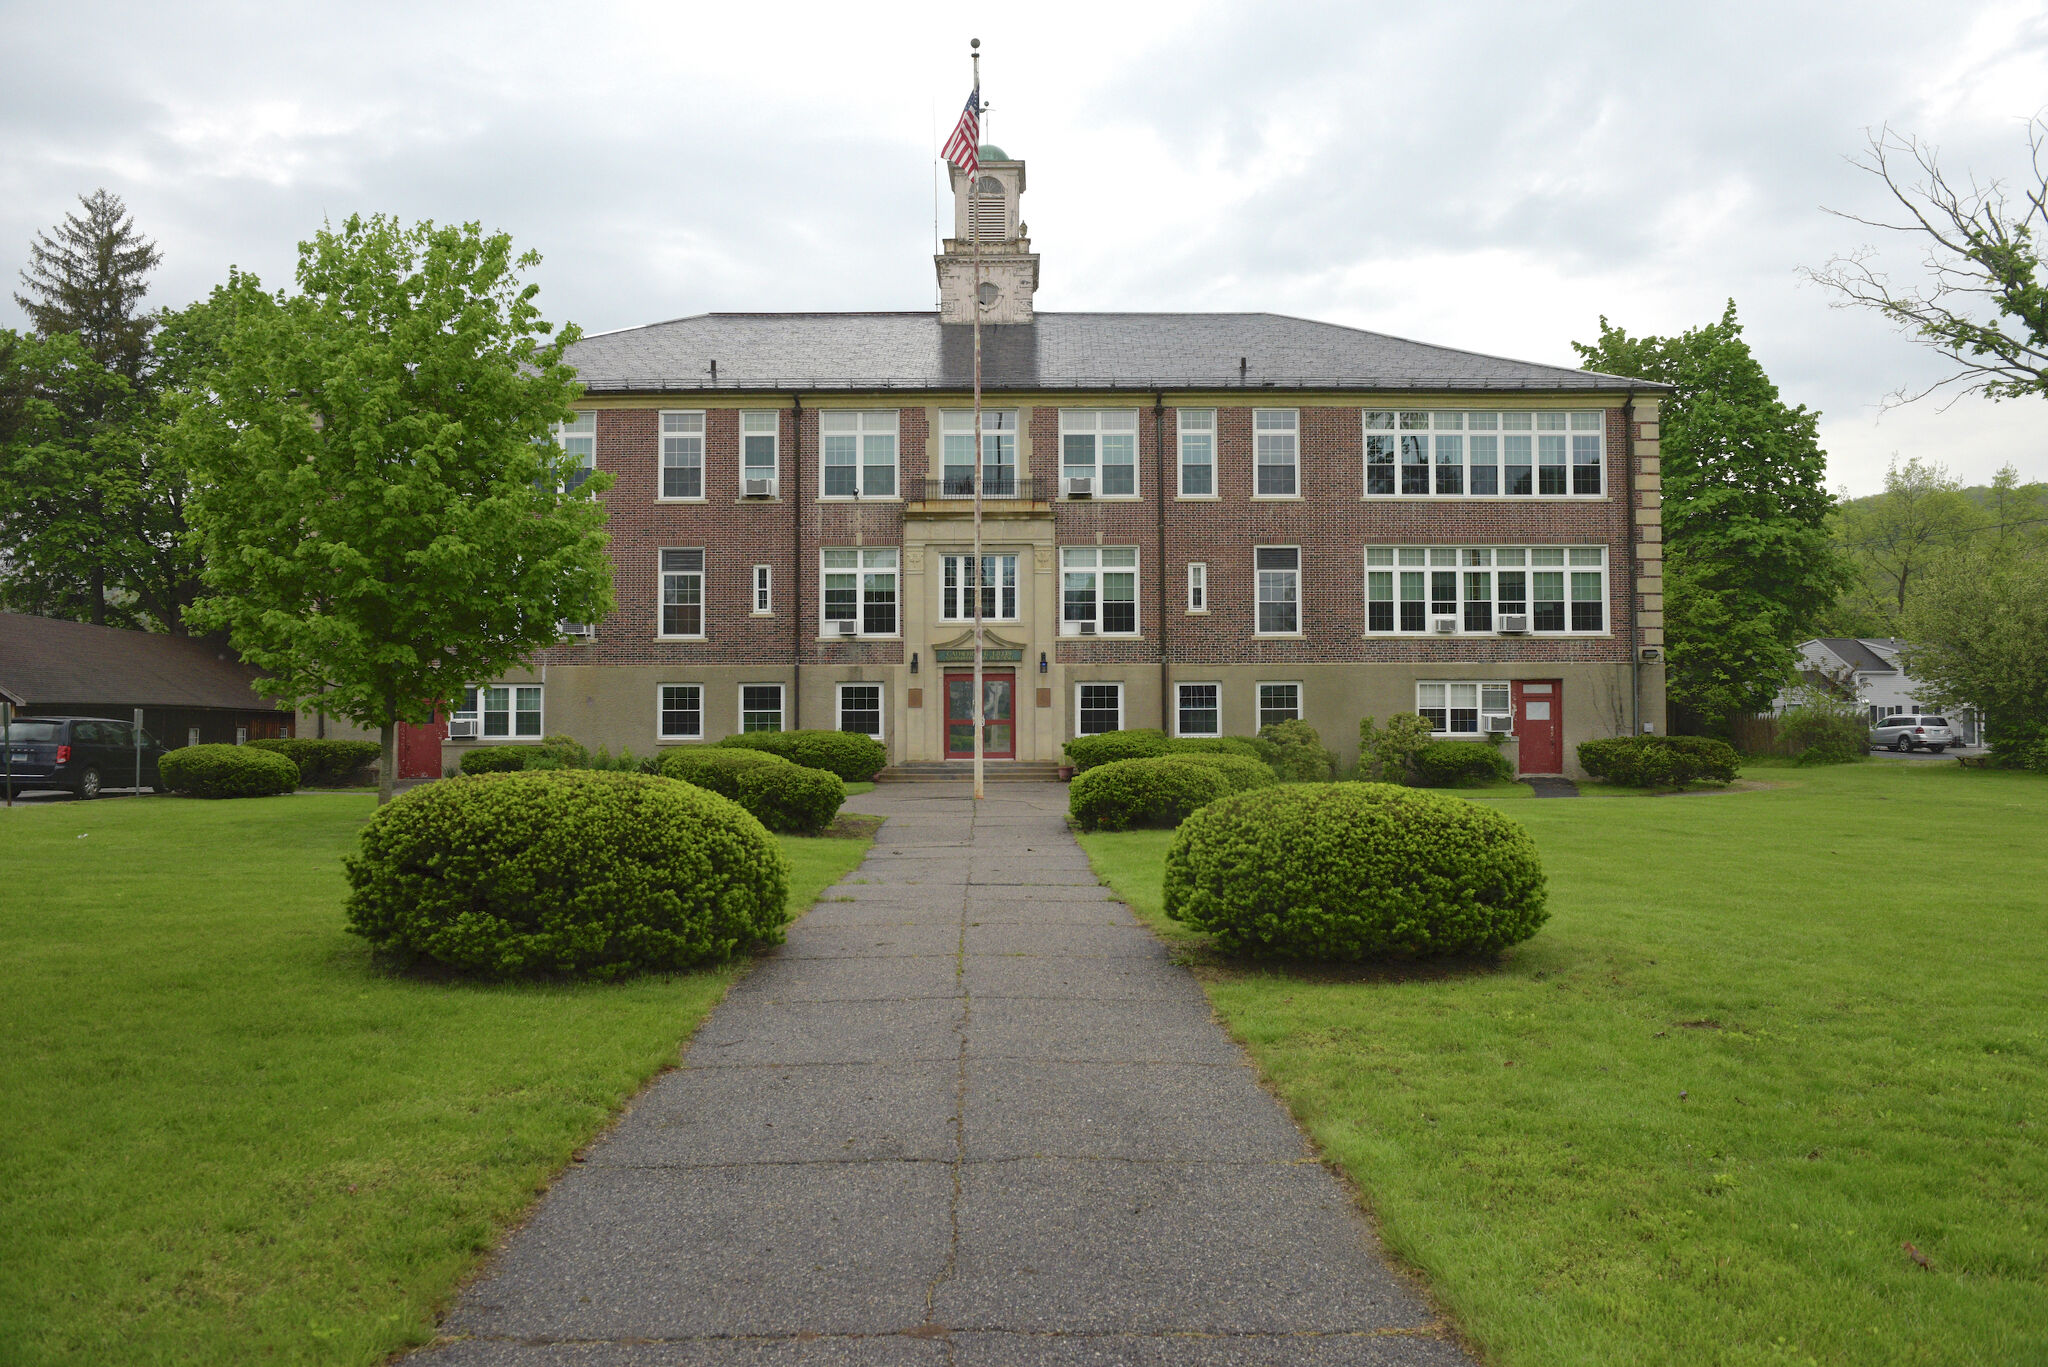 The New Milford School Board feels “attacked” by the city over the care of the buildings